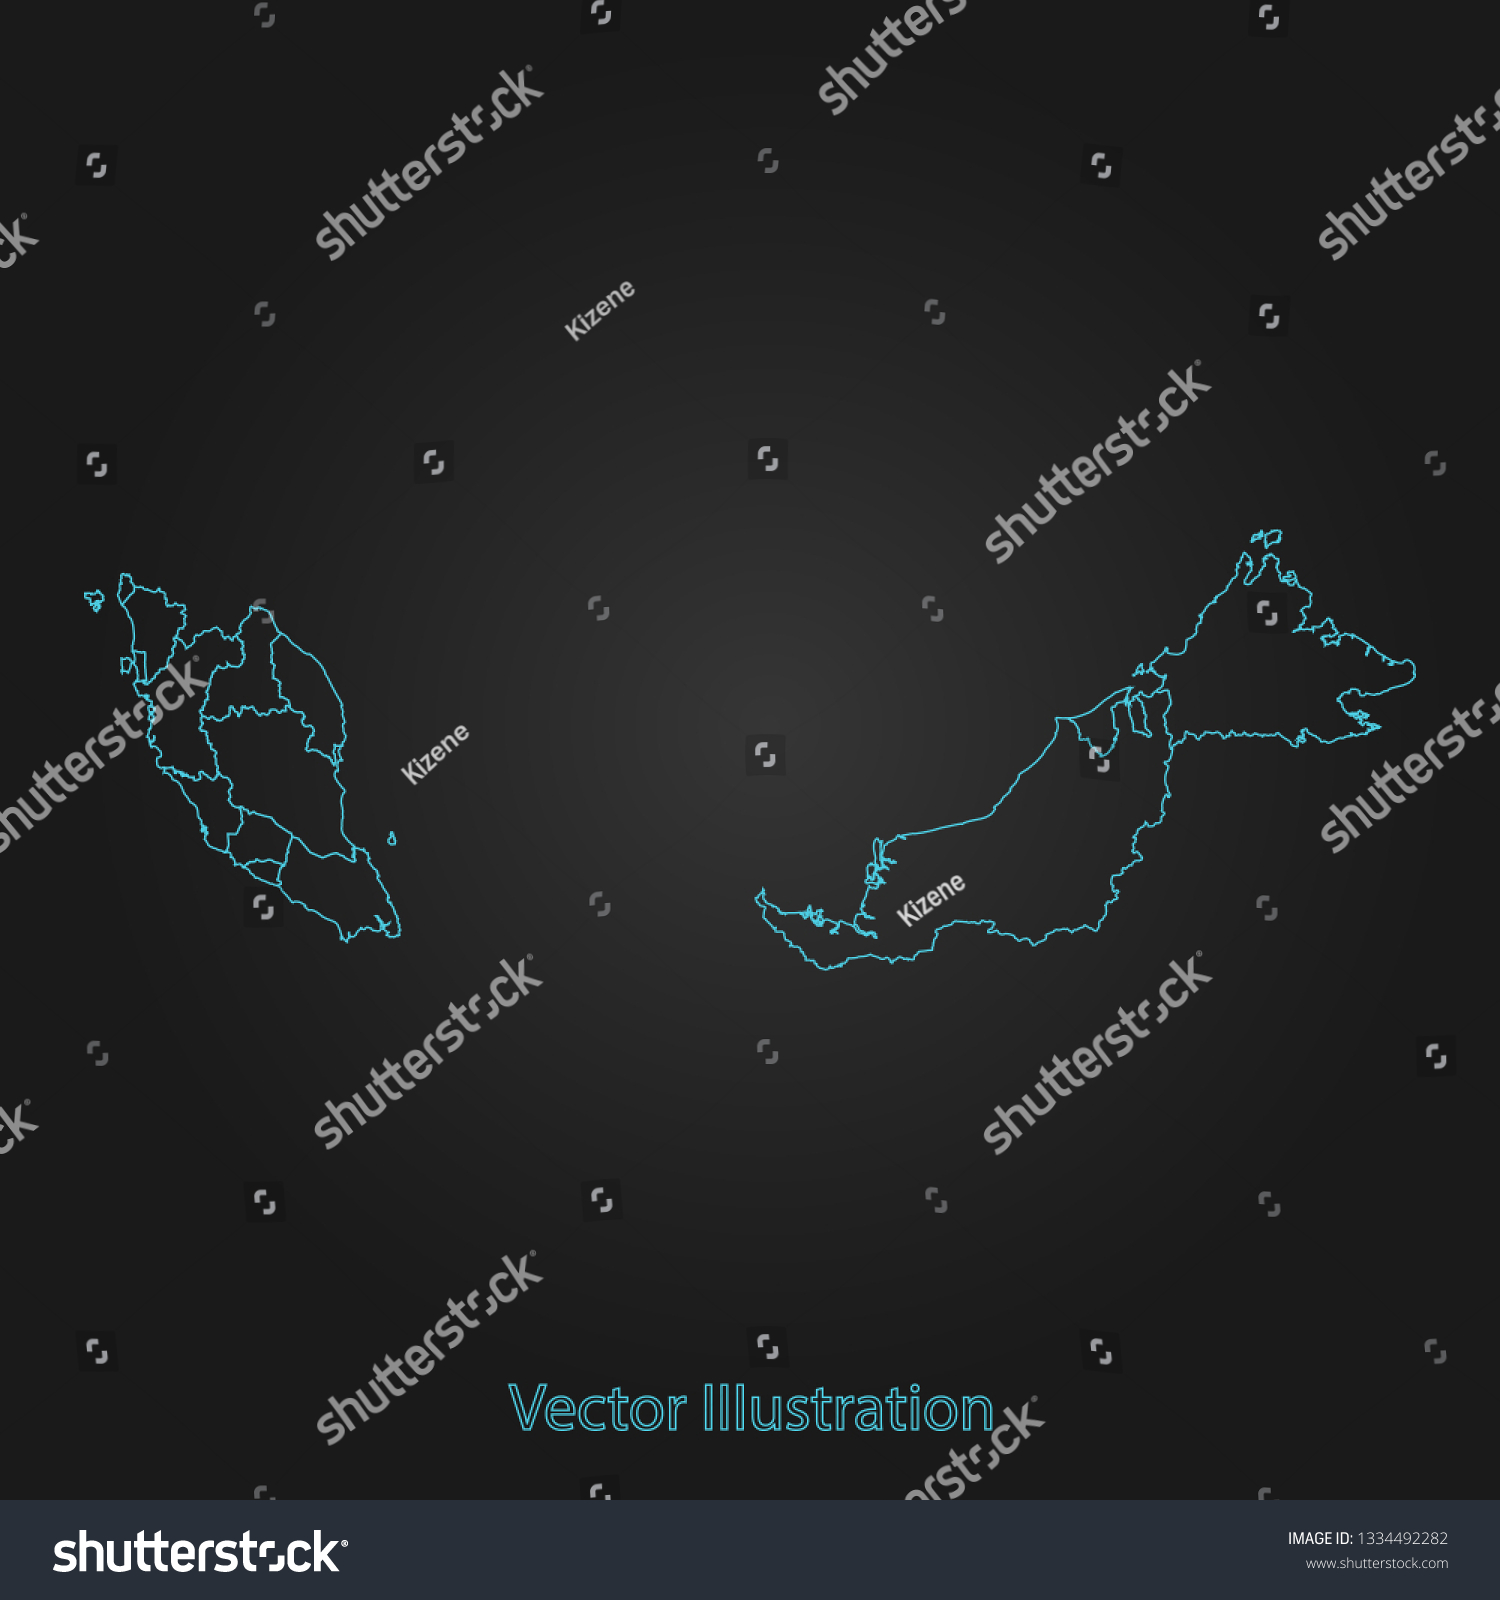 Malaysia map - Abstract mash line and point scales on dark background with Malaysia. flat design style, clean and modern. Vector Illustration eps10 #1334492282